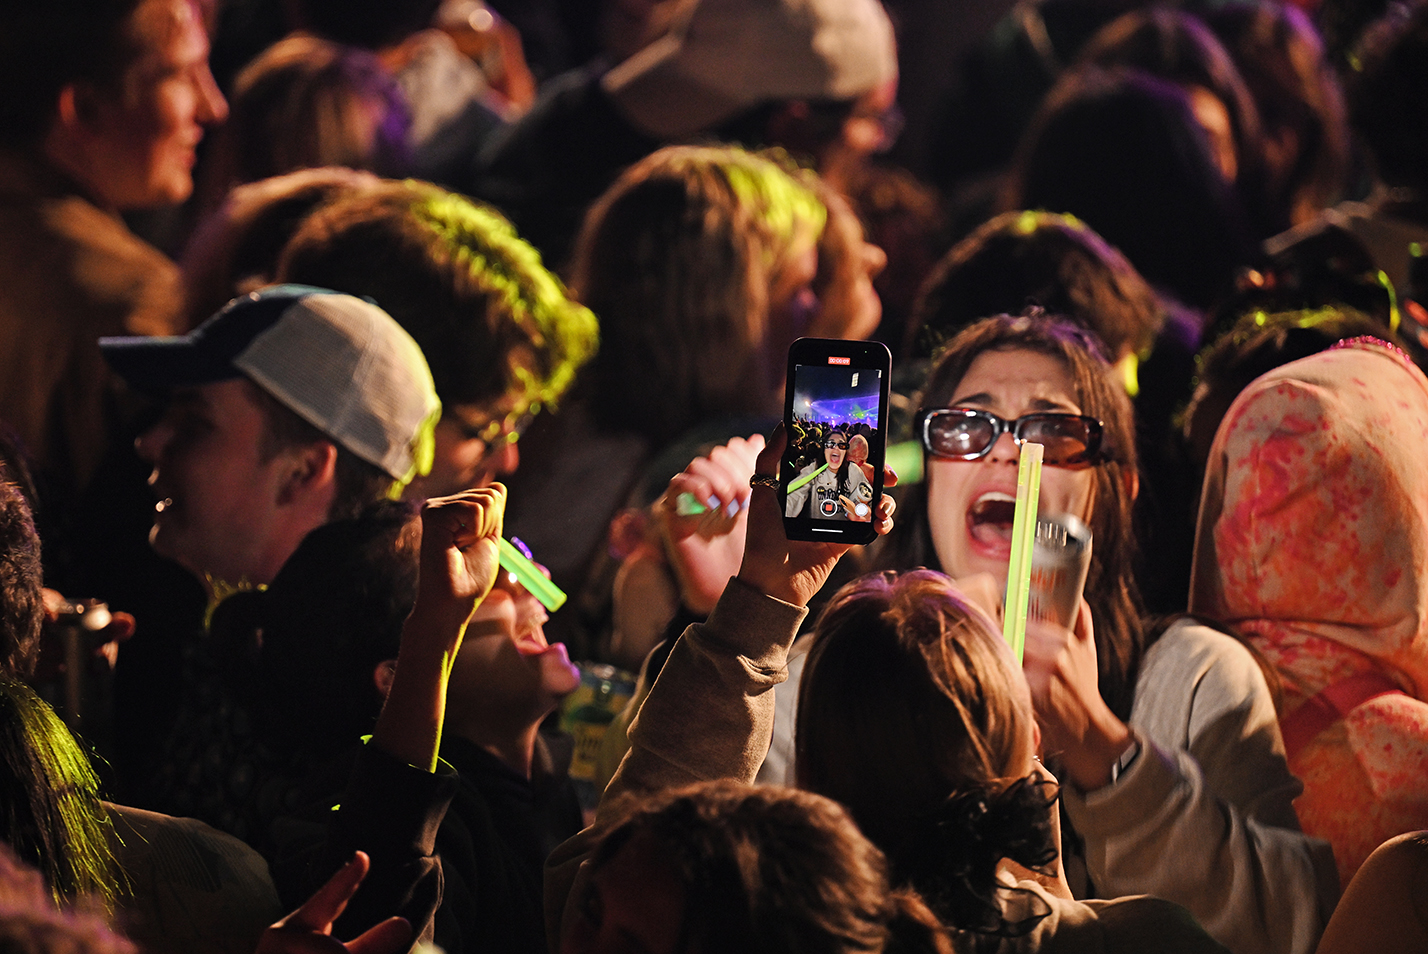 A student makes a face for a smartphone camera while amidst a crowd at a concert